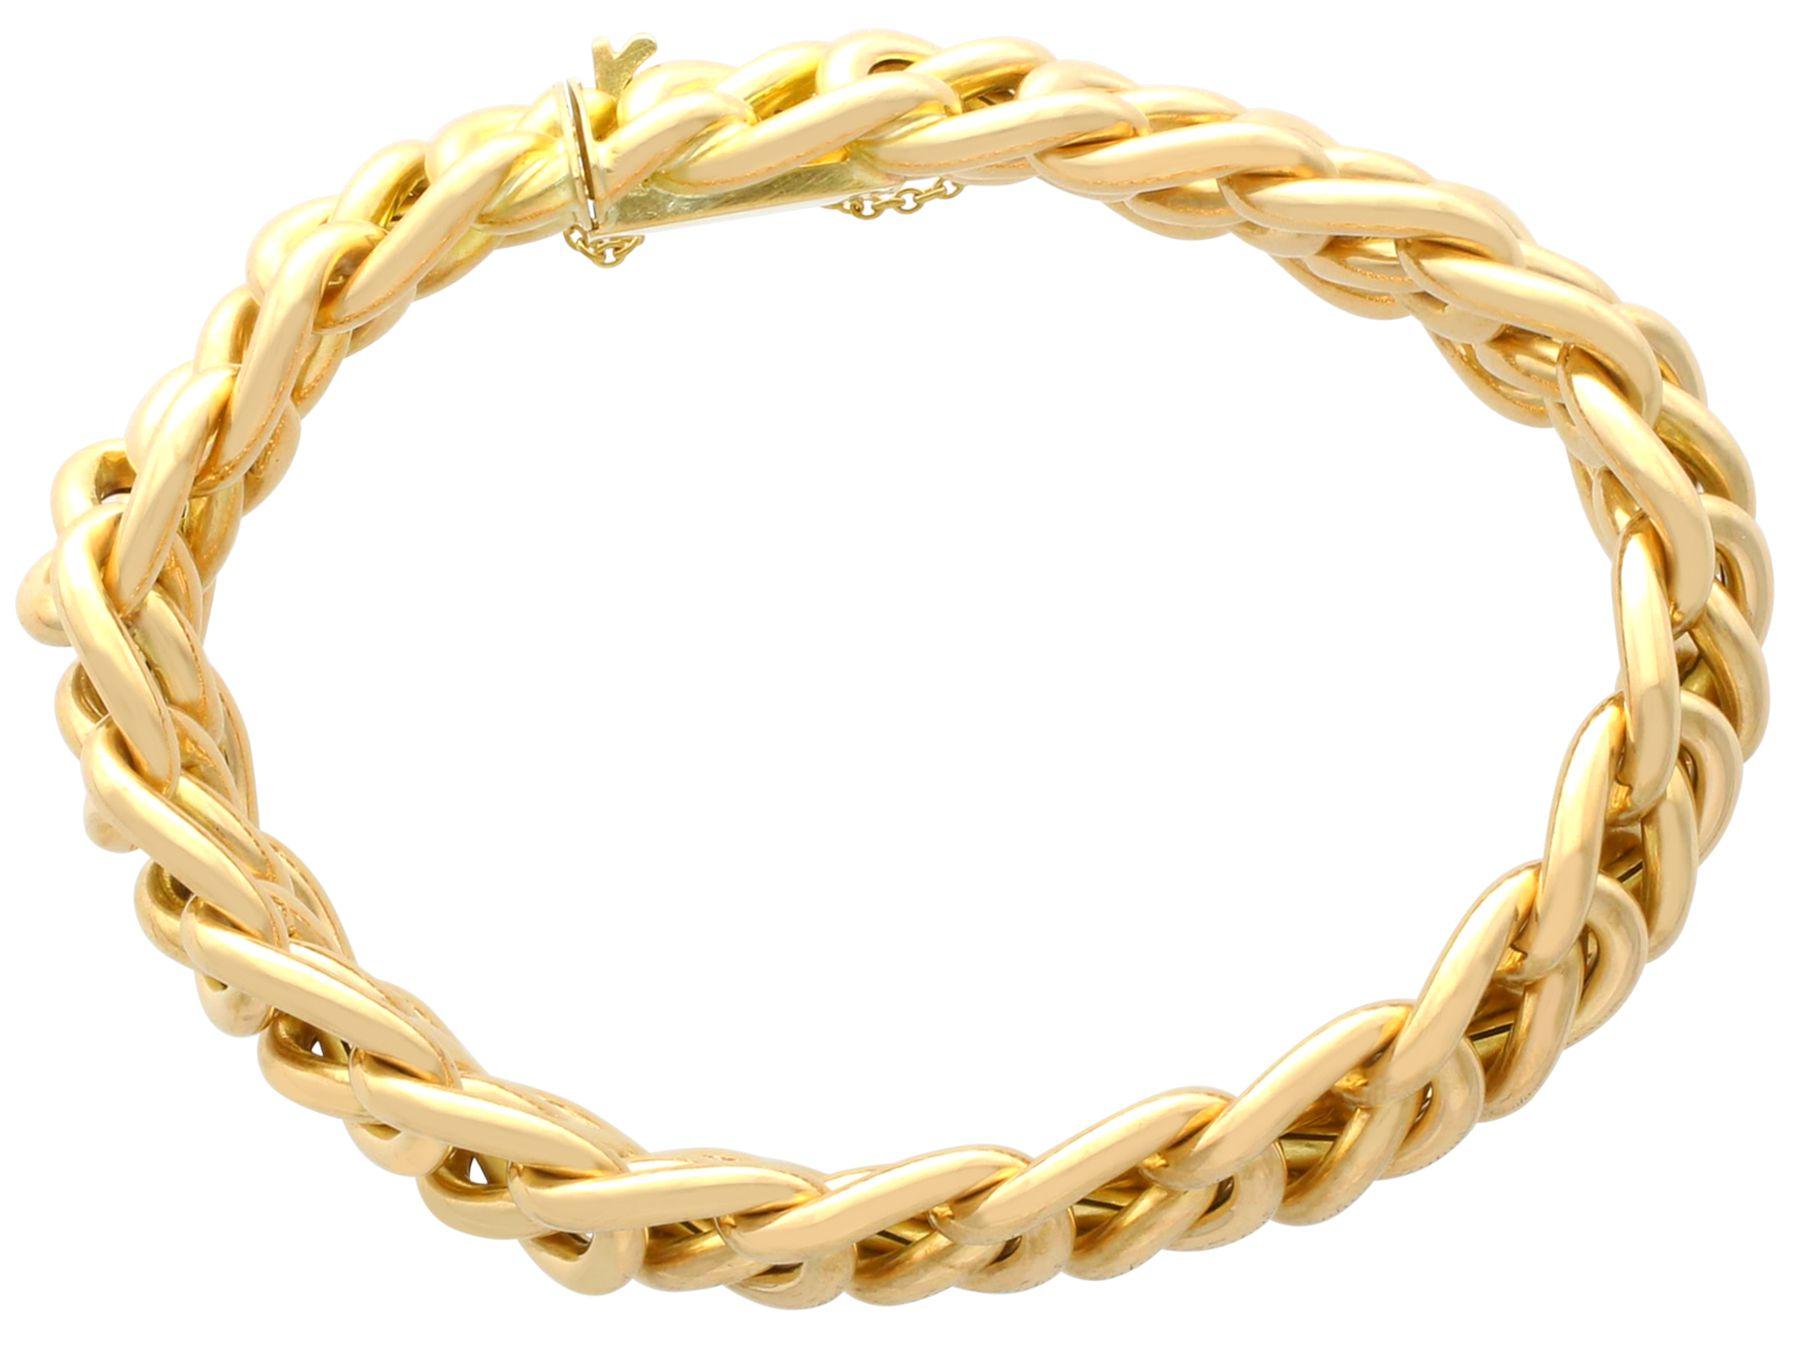 An exceptional, fine and impressive antique French bracelet crafted in 18 karat yellow gold; part of our diverse antique jewelry and estate jewelry collections

This exceptional, fine and impressive antique bracelet has been crafted in 18k yellow